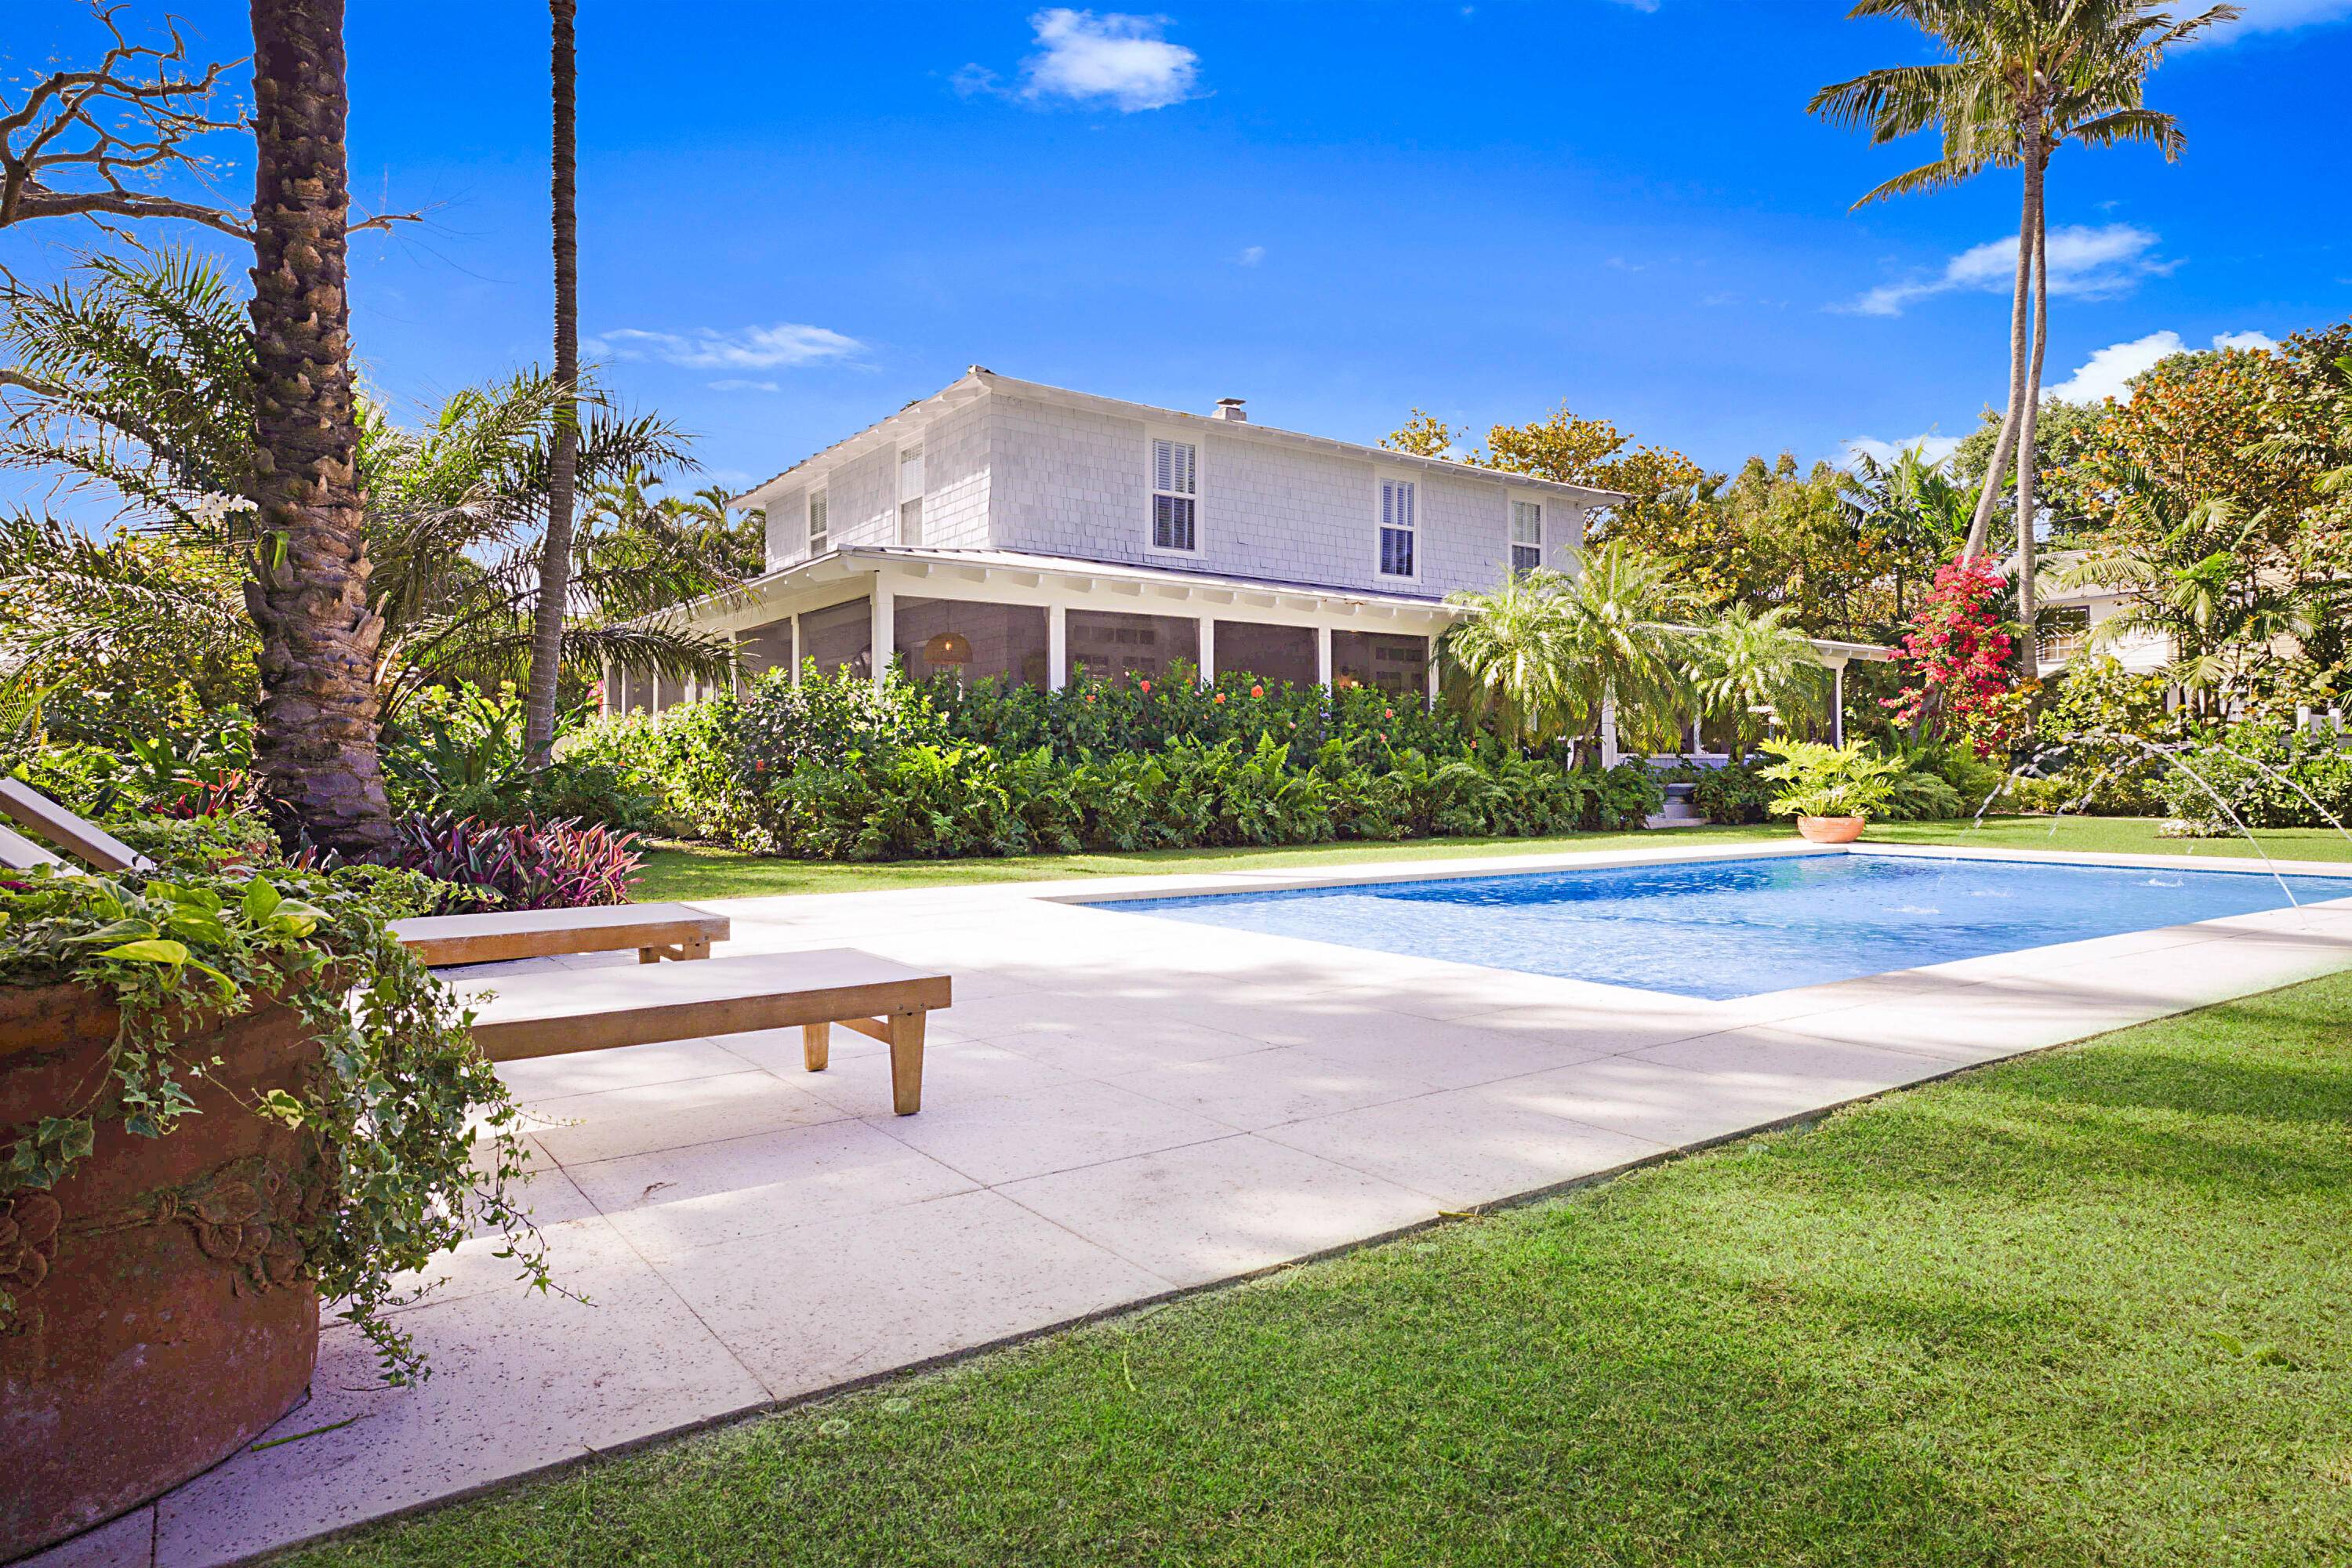 Welcome to 3402 Floral Ave, a stunning Montauk style 4bedroom 4bath home tucked away on a tranquil estate size lot a block from N Flagler in the coveted Northwood Shores ...